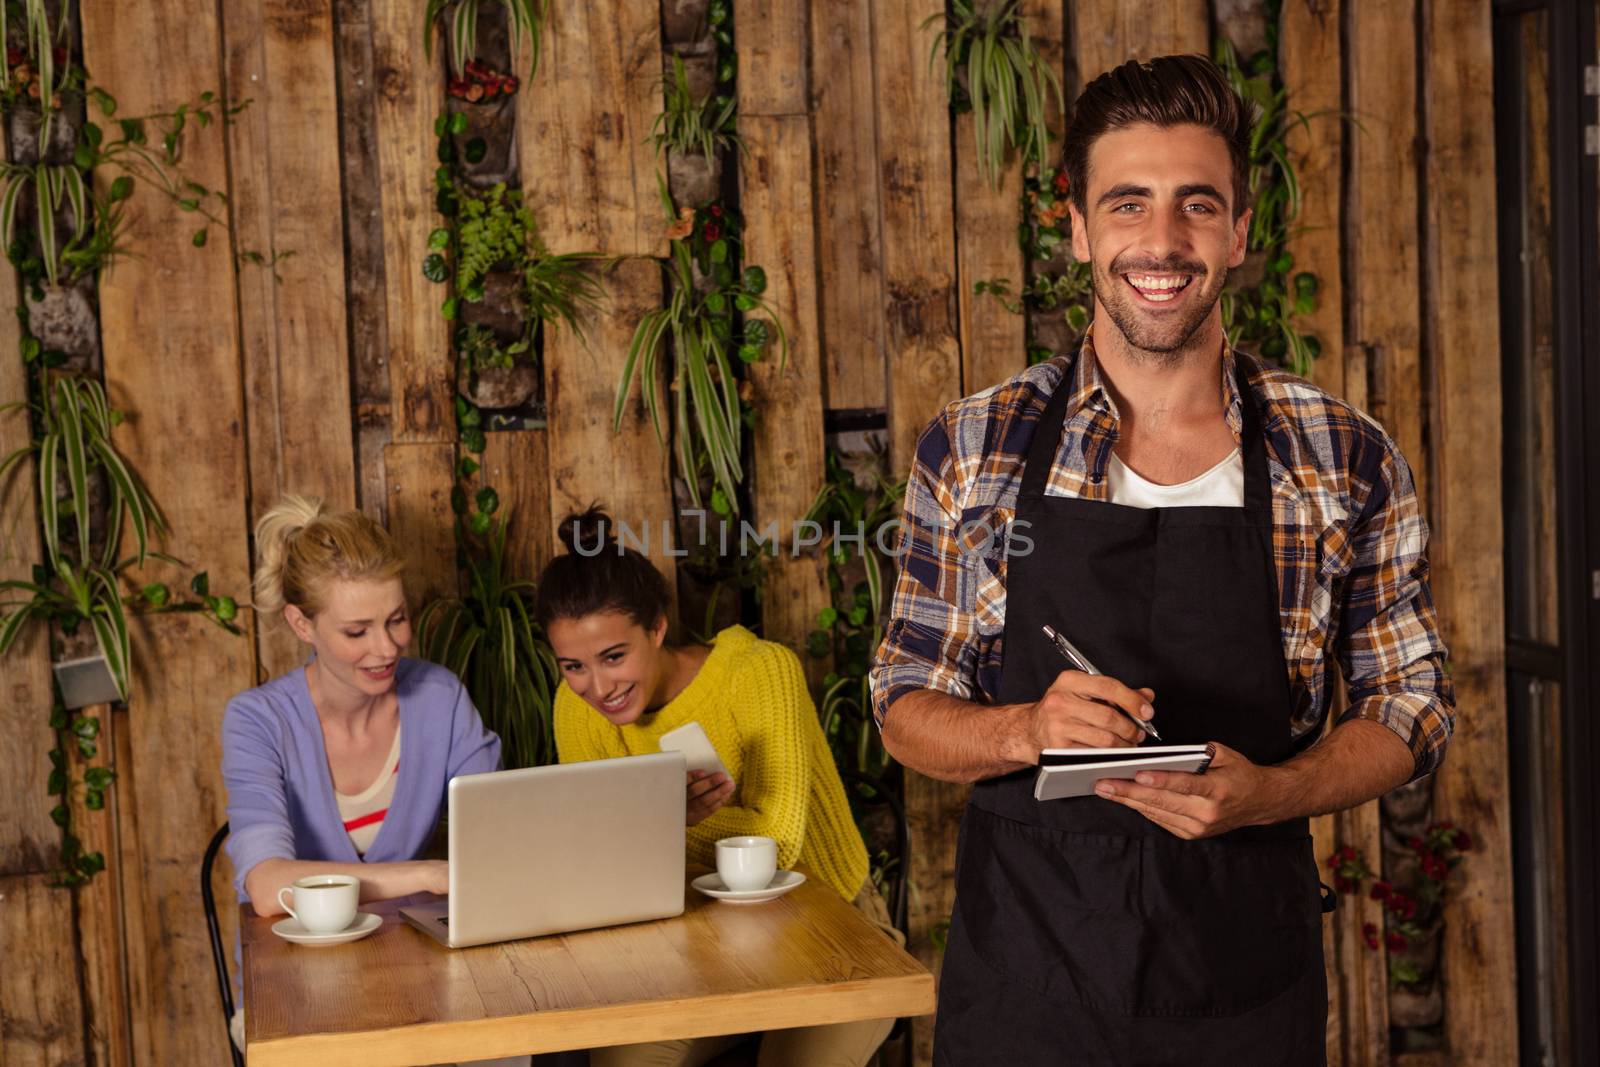 A waiter is taking the order in front of the two friends in a coffee shop